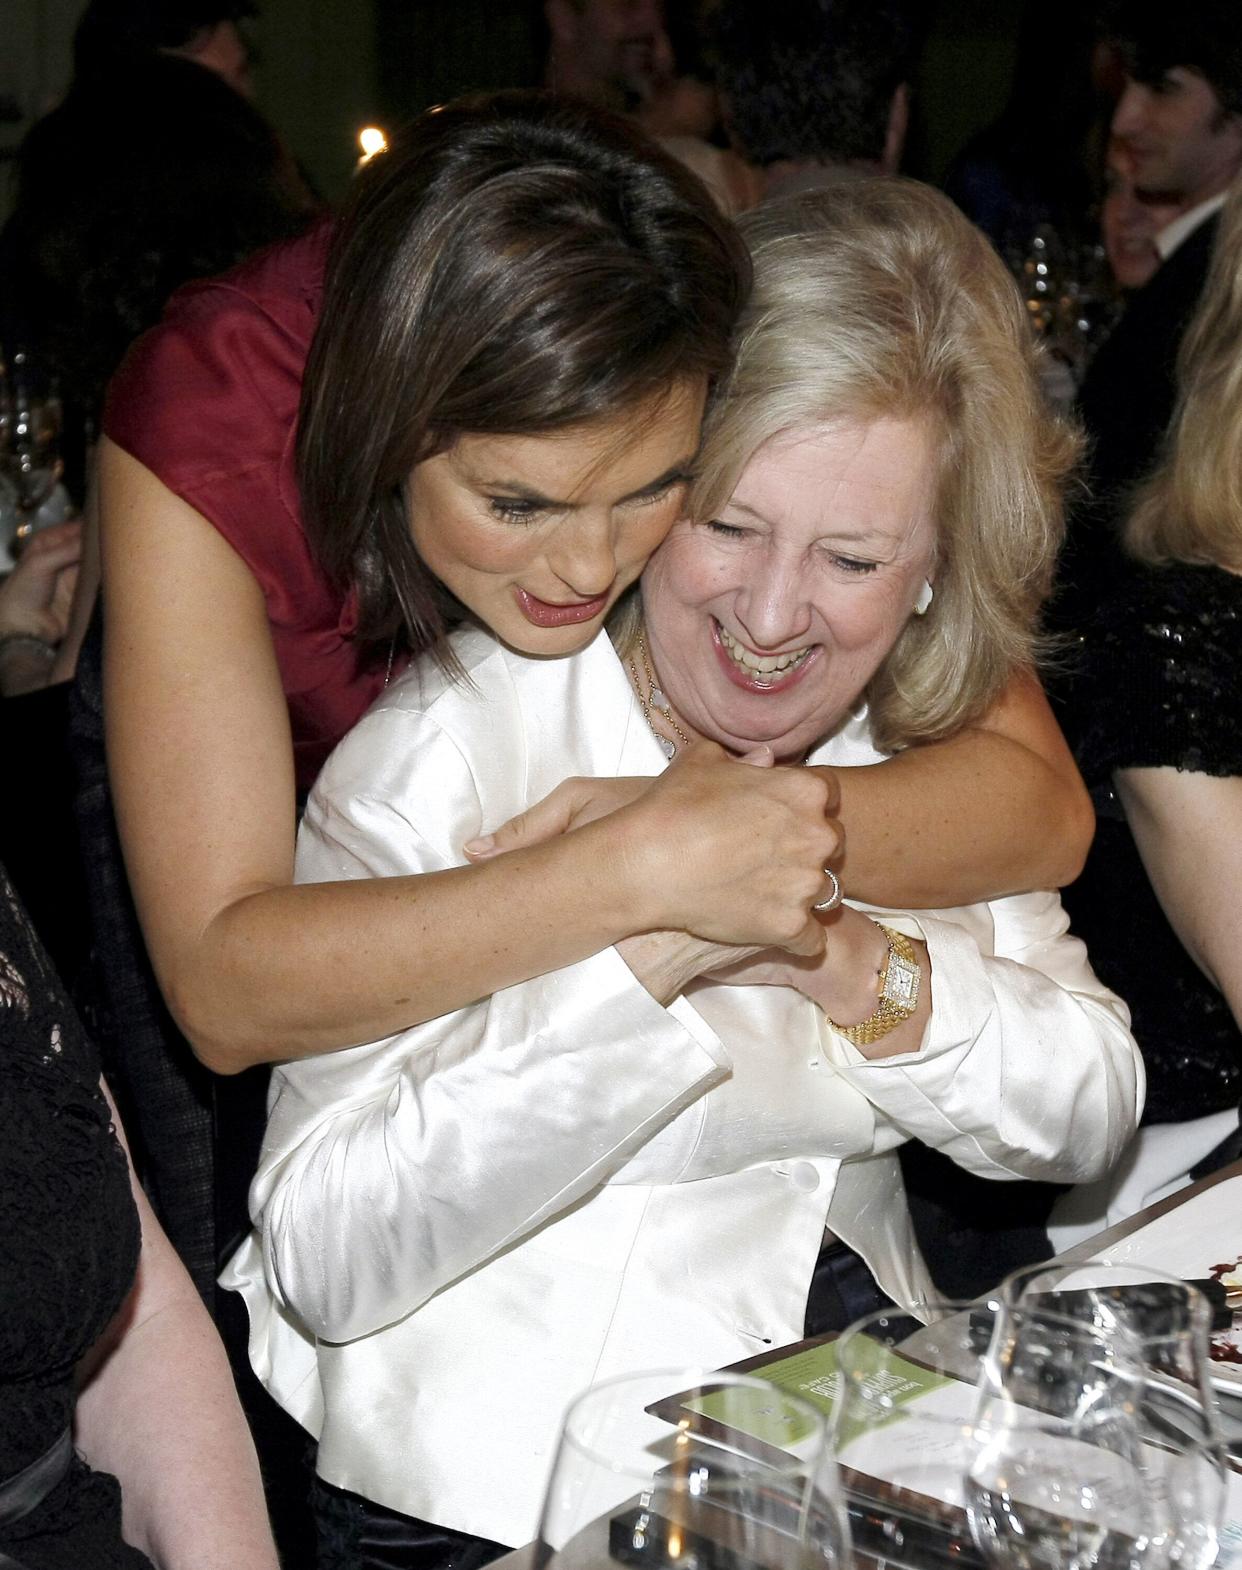 Actress Mariska Hargitay hugs Fairstein at the Bon Appetit Supper Club and Cafe on October 26, 2008, in New York City at the annual Joyful Heart Foundation Dinner. Fairstein served on the board of Joyful Heart, which Hargitay founded. (Photo: Jemal Countess via Getty Images)